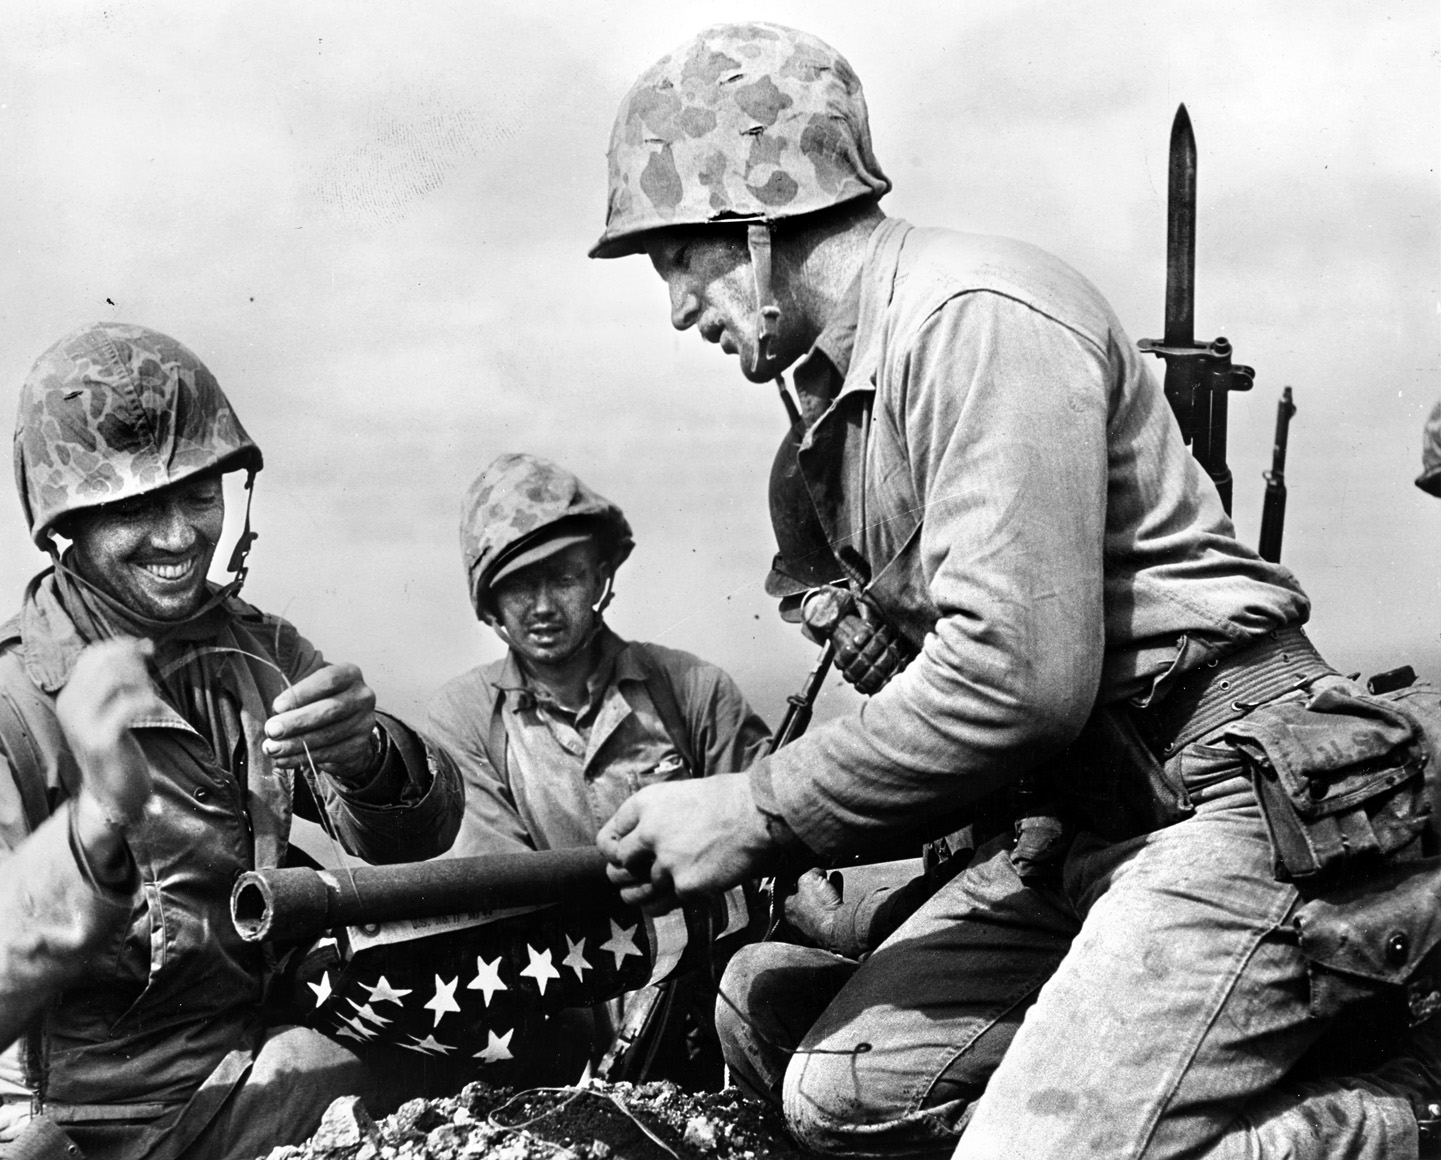 Just prior to the first flag raising on Mount Suribachi, Marines of the 28th Regiment lash the U.S. flag to a length of pipe they located on the summit. The first flag was raised at 10:20 a.m. on February 23, and was followed by the raising of the larger flag made famous in the iconic photo by Joe Rosenthal.